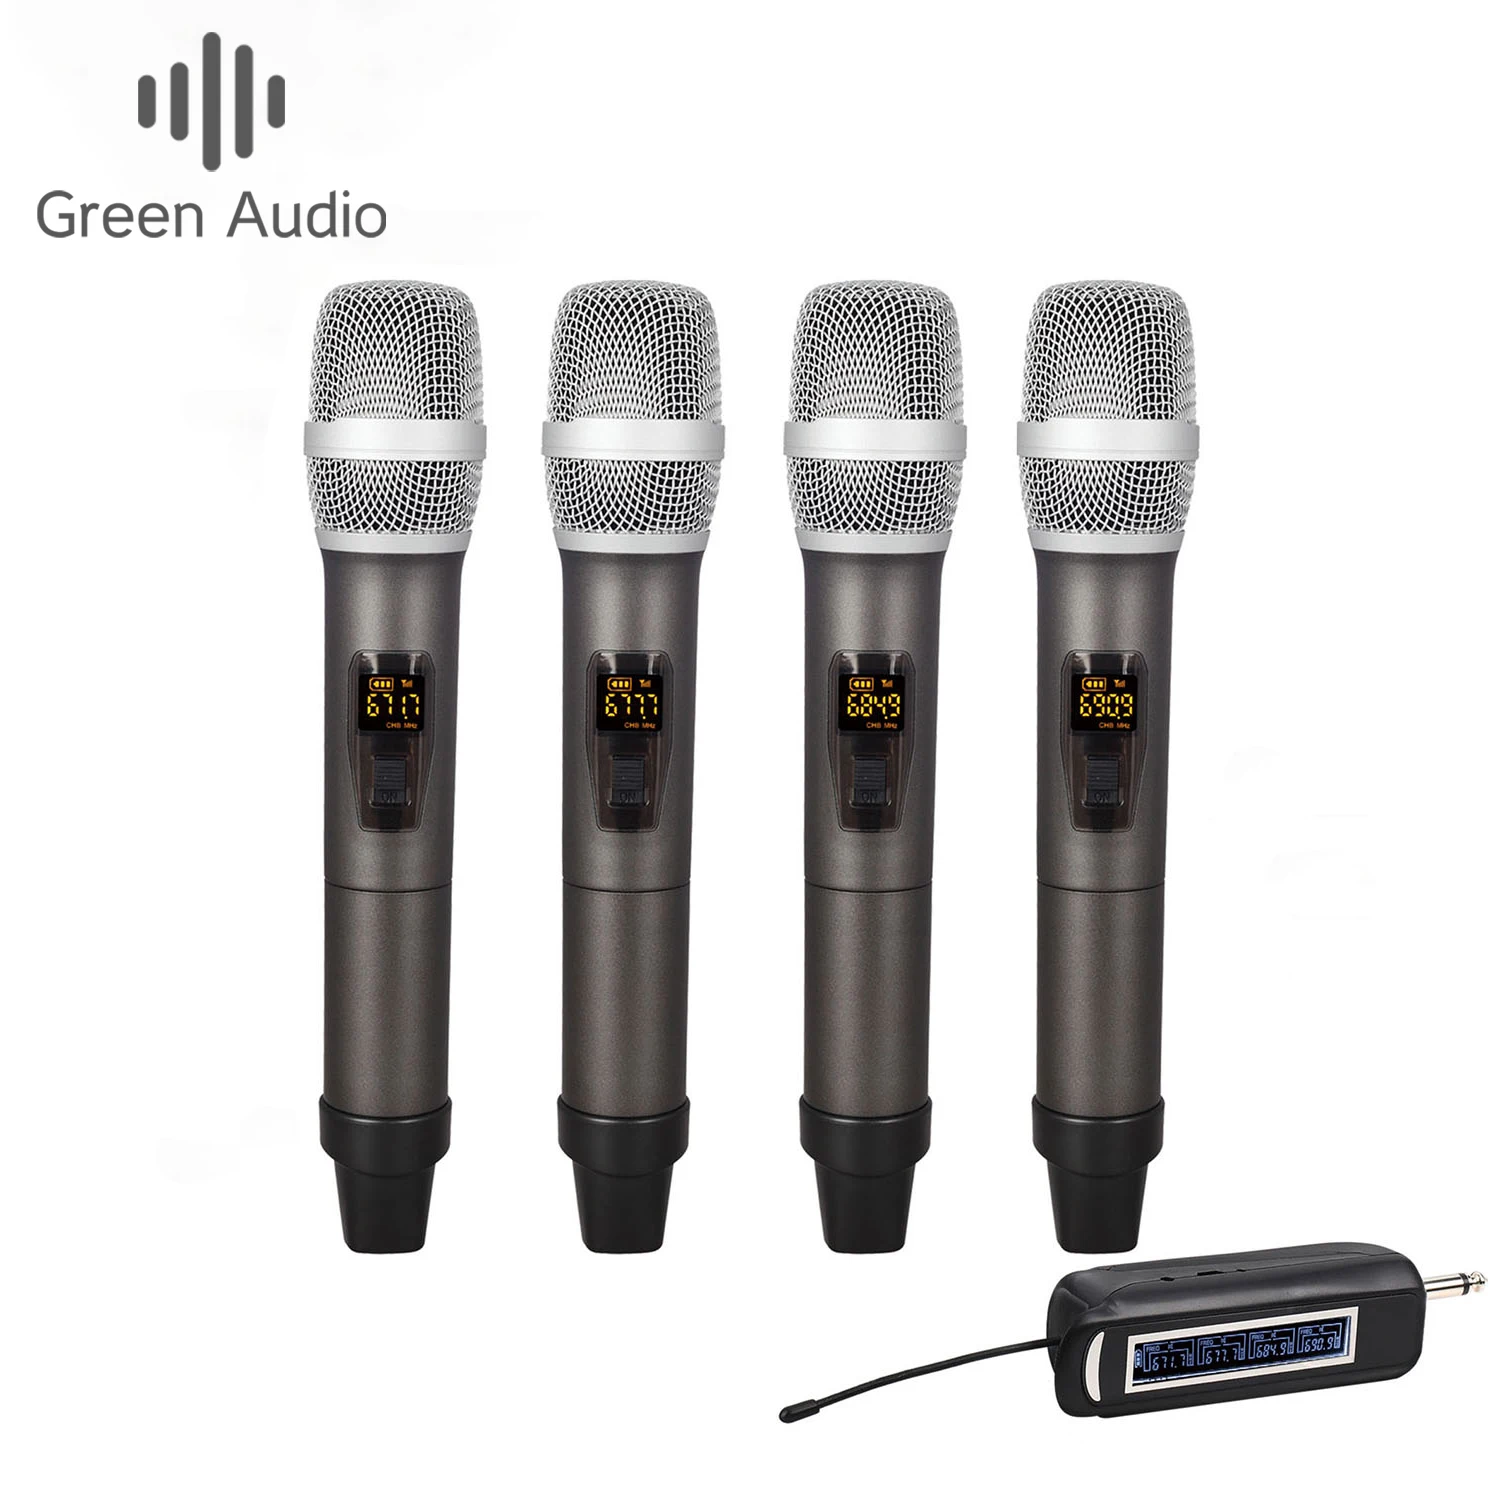 

GAW-RM50 Green Audio Wireless Microphone 4 Channels UHF Professional Handheld Mic Microphone For Party Karaoke Church Show Meeti